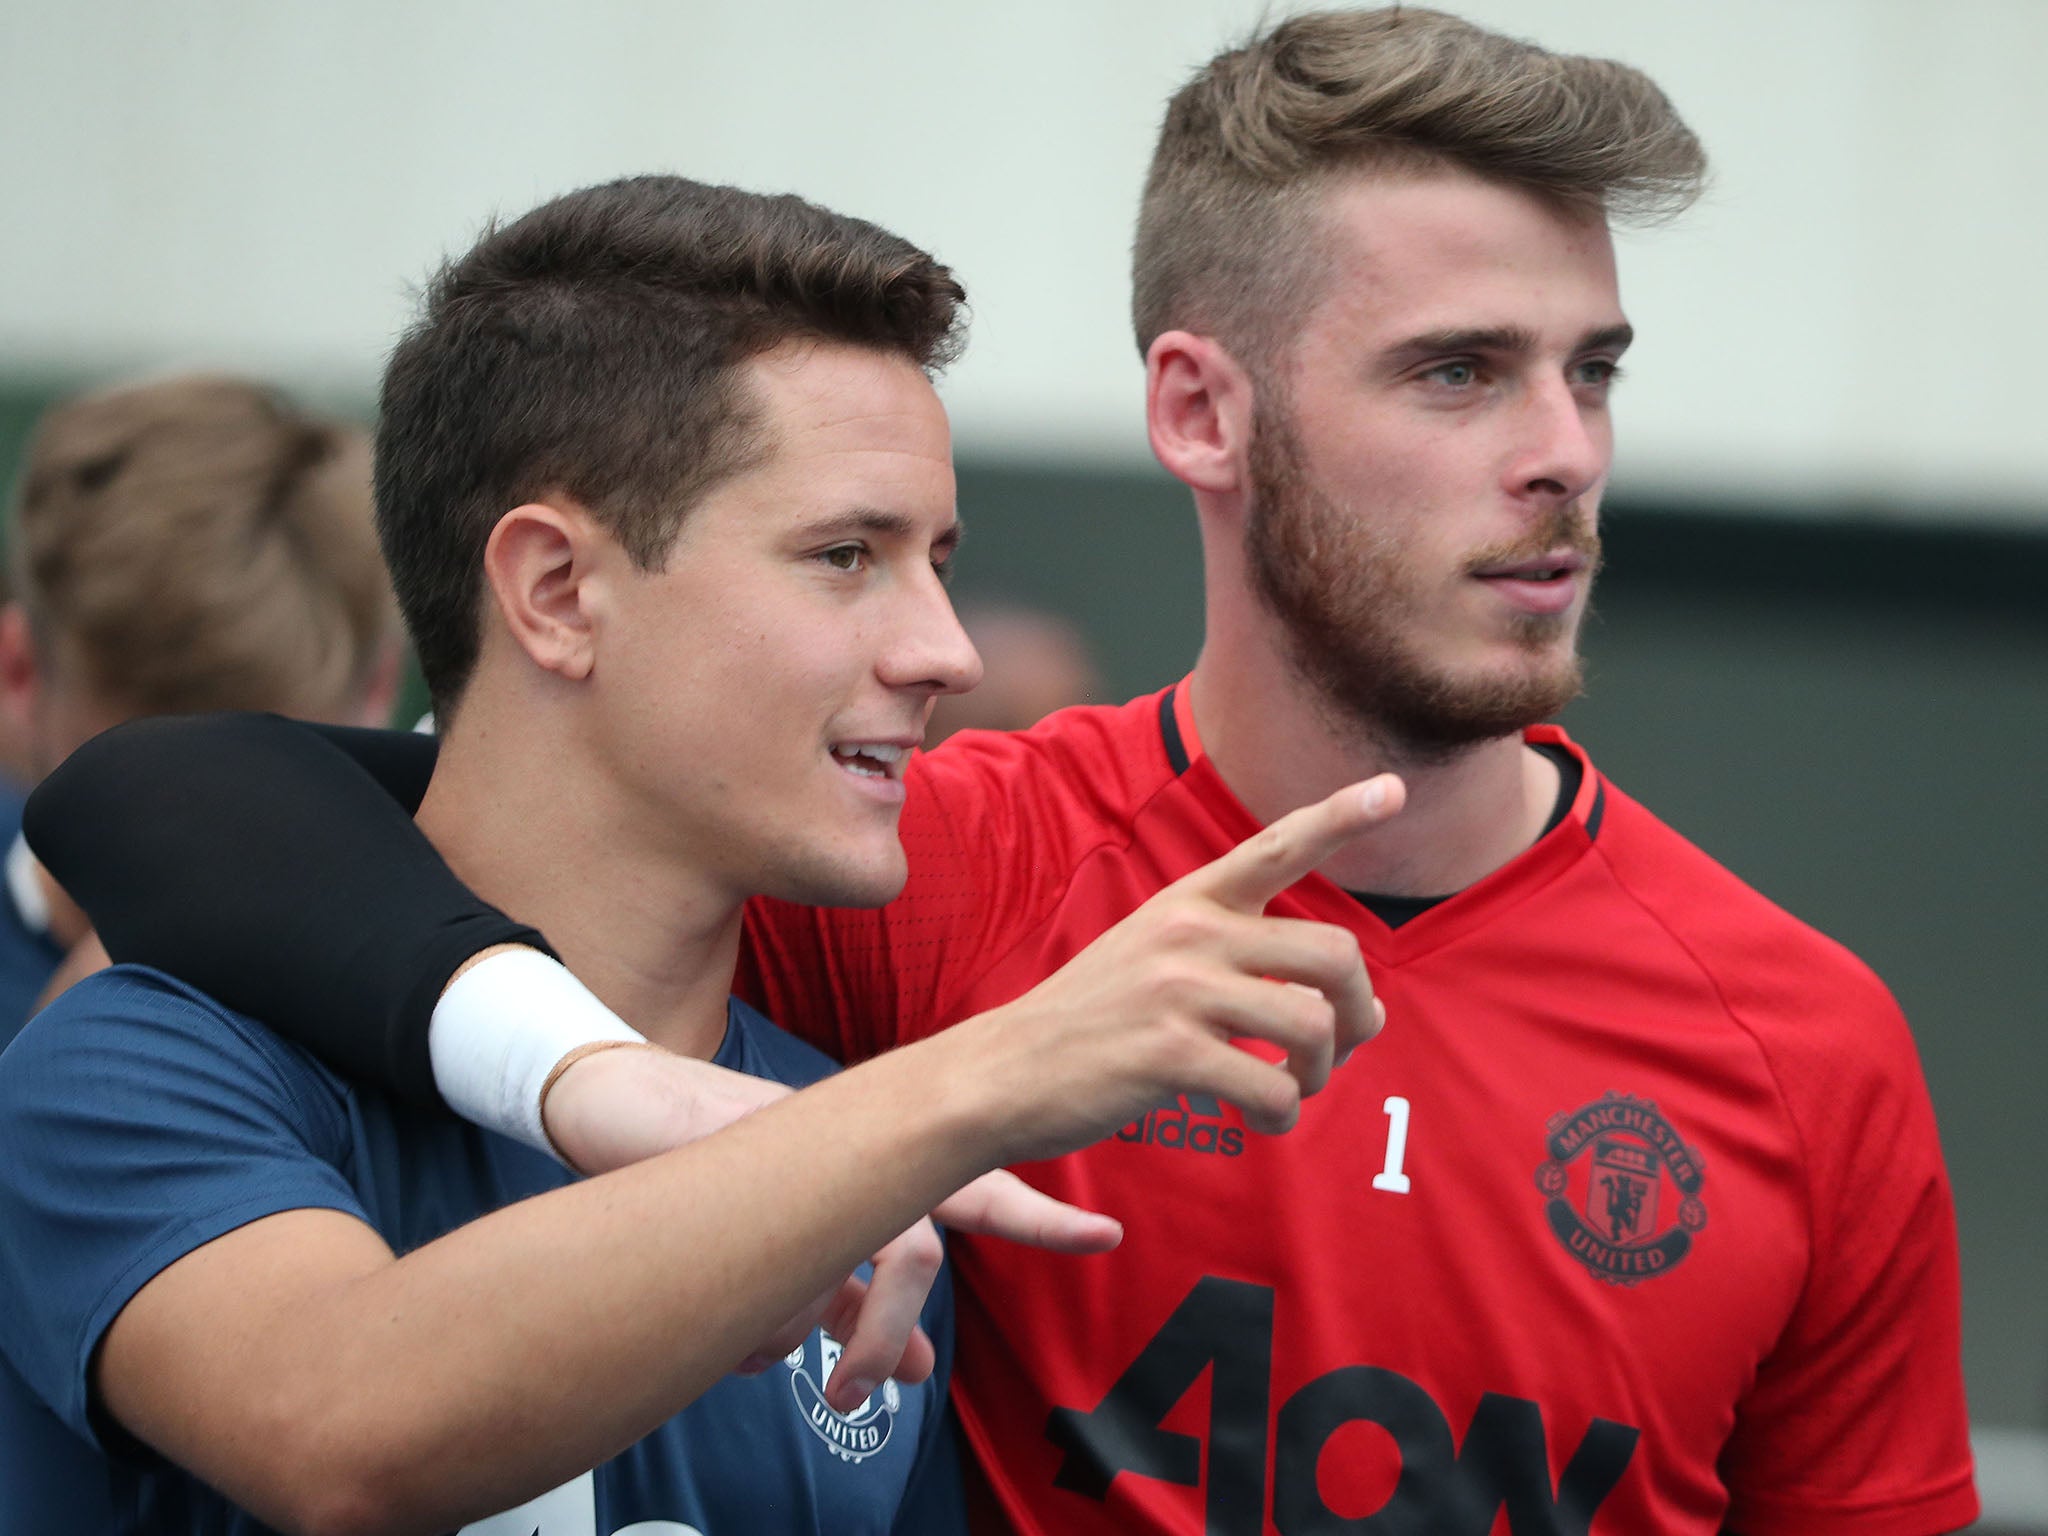 Herrera and De Gea are good friends outside of football